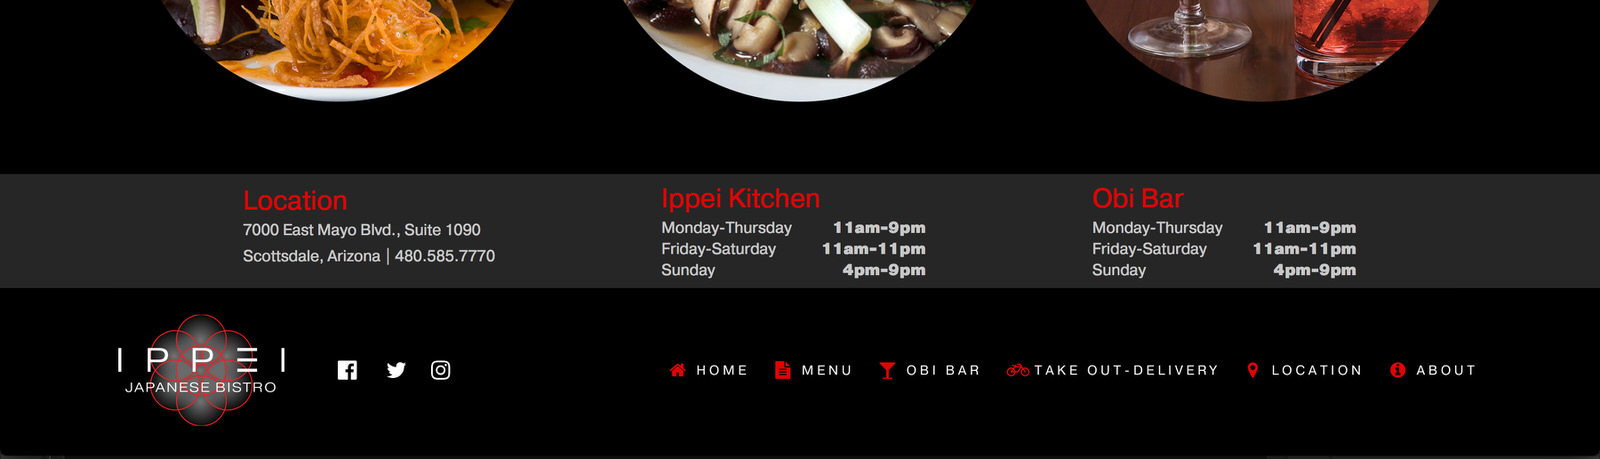 Restaurant Homepage - NAP/Hours in footer